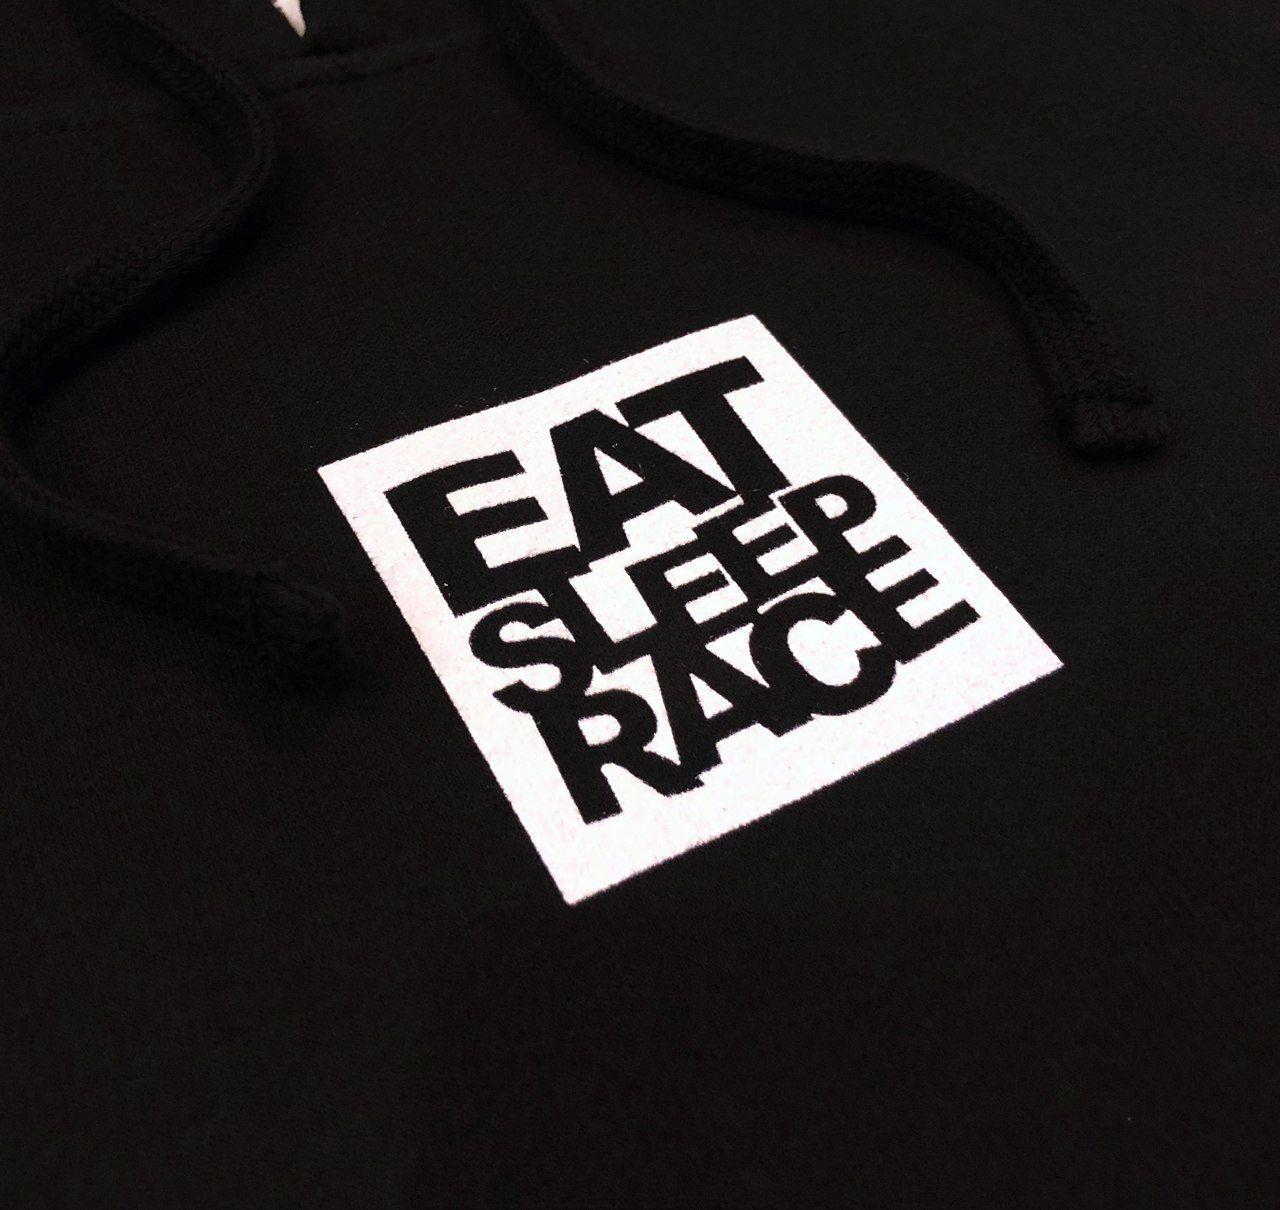 Black and White Clothing and Apparel Logo - Pull Over Logo Square Hoodie | Black/White - Eat Sleep Race - Racing ...